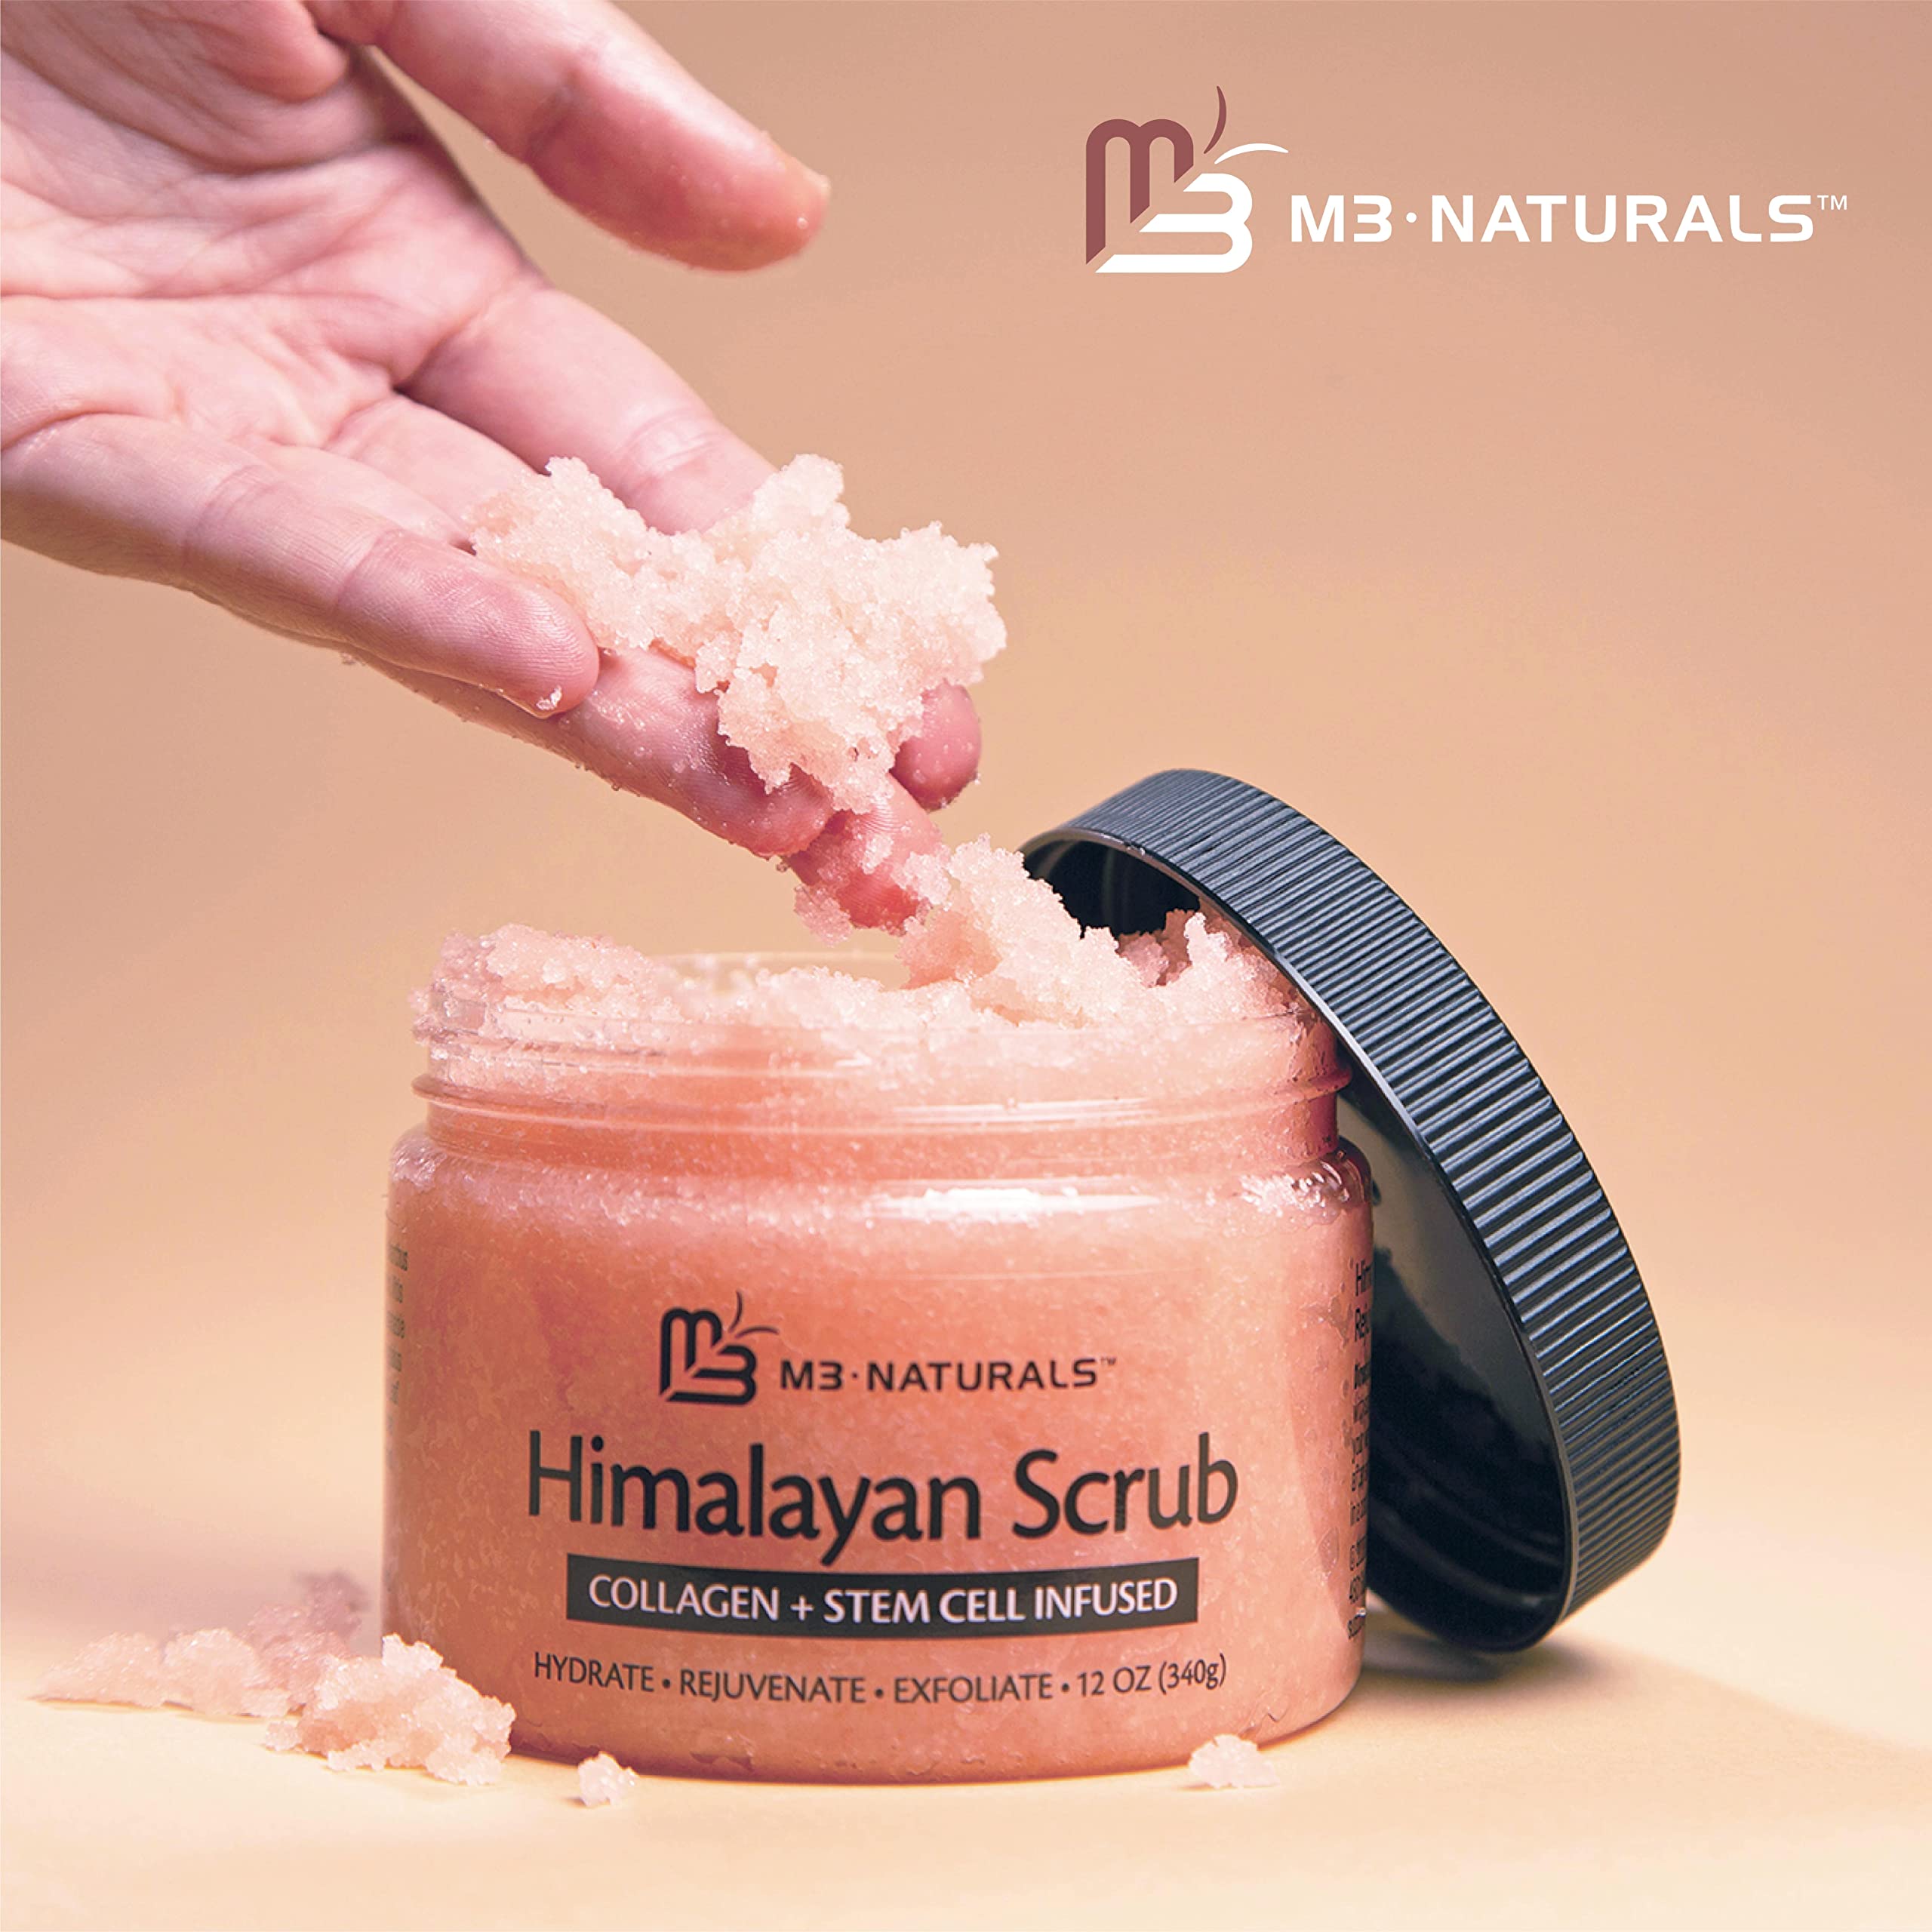 Himalayan Salt Scrub Exfoliating Foot, Scalp & Body Scrub Infused with Collagen and Stem Cell Natural Exfoliating Salt Scrub for Toning Skin Cellulite Deep Cleansing SkinCare Scrub | Exfoliate and Moisturize by M3 Naturals